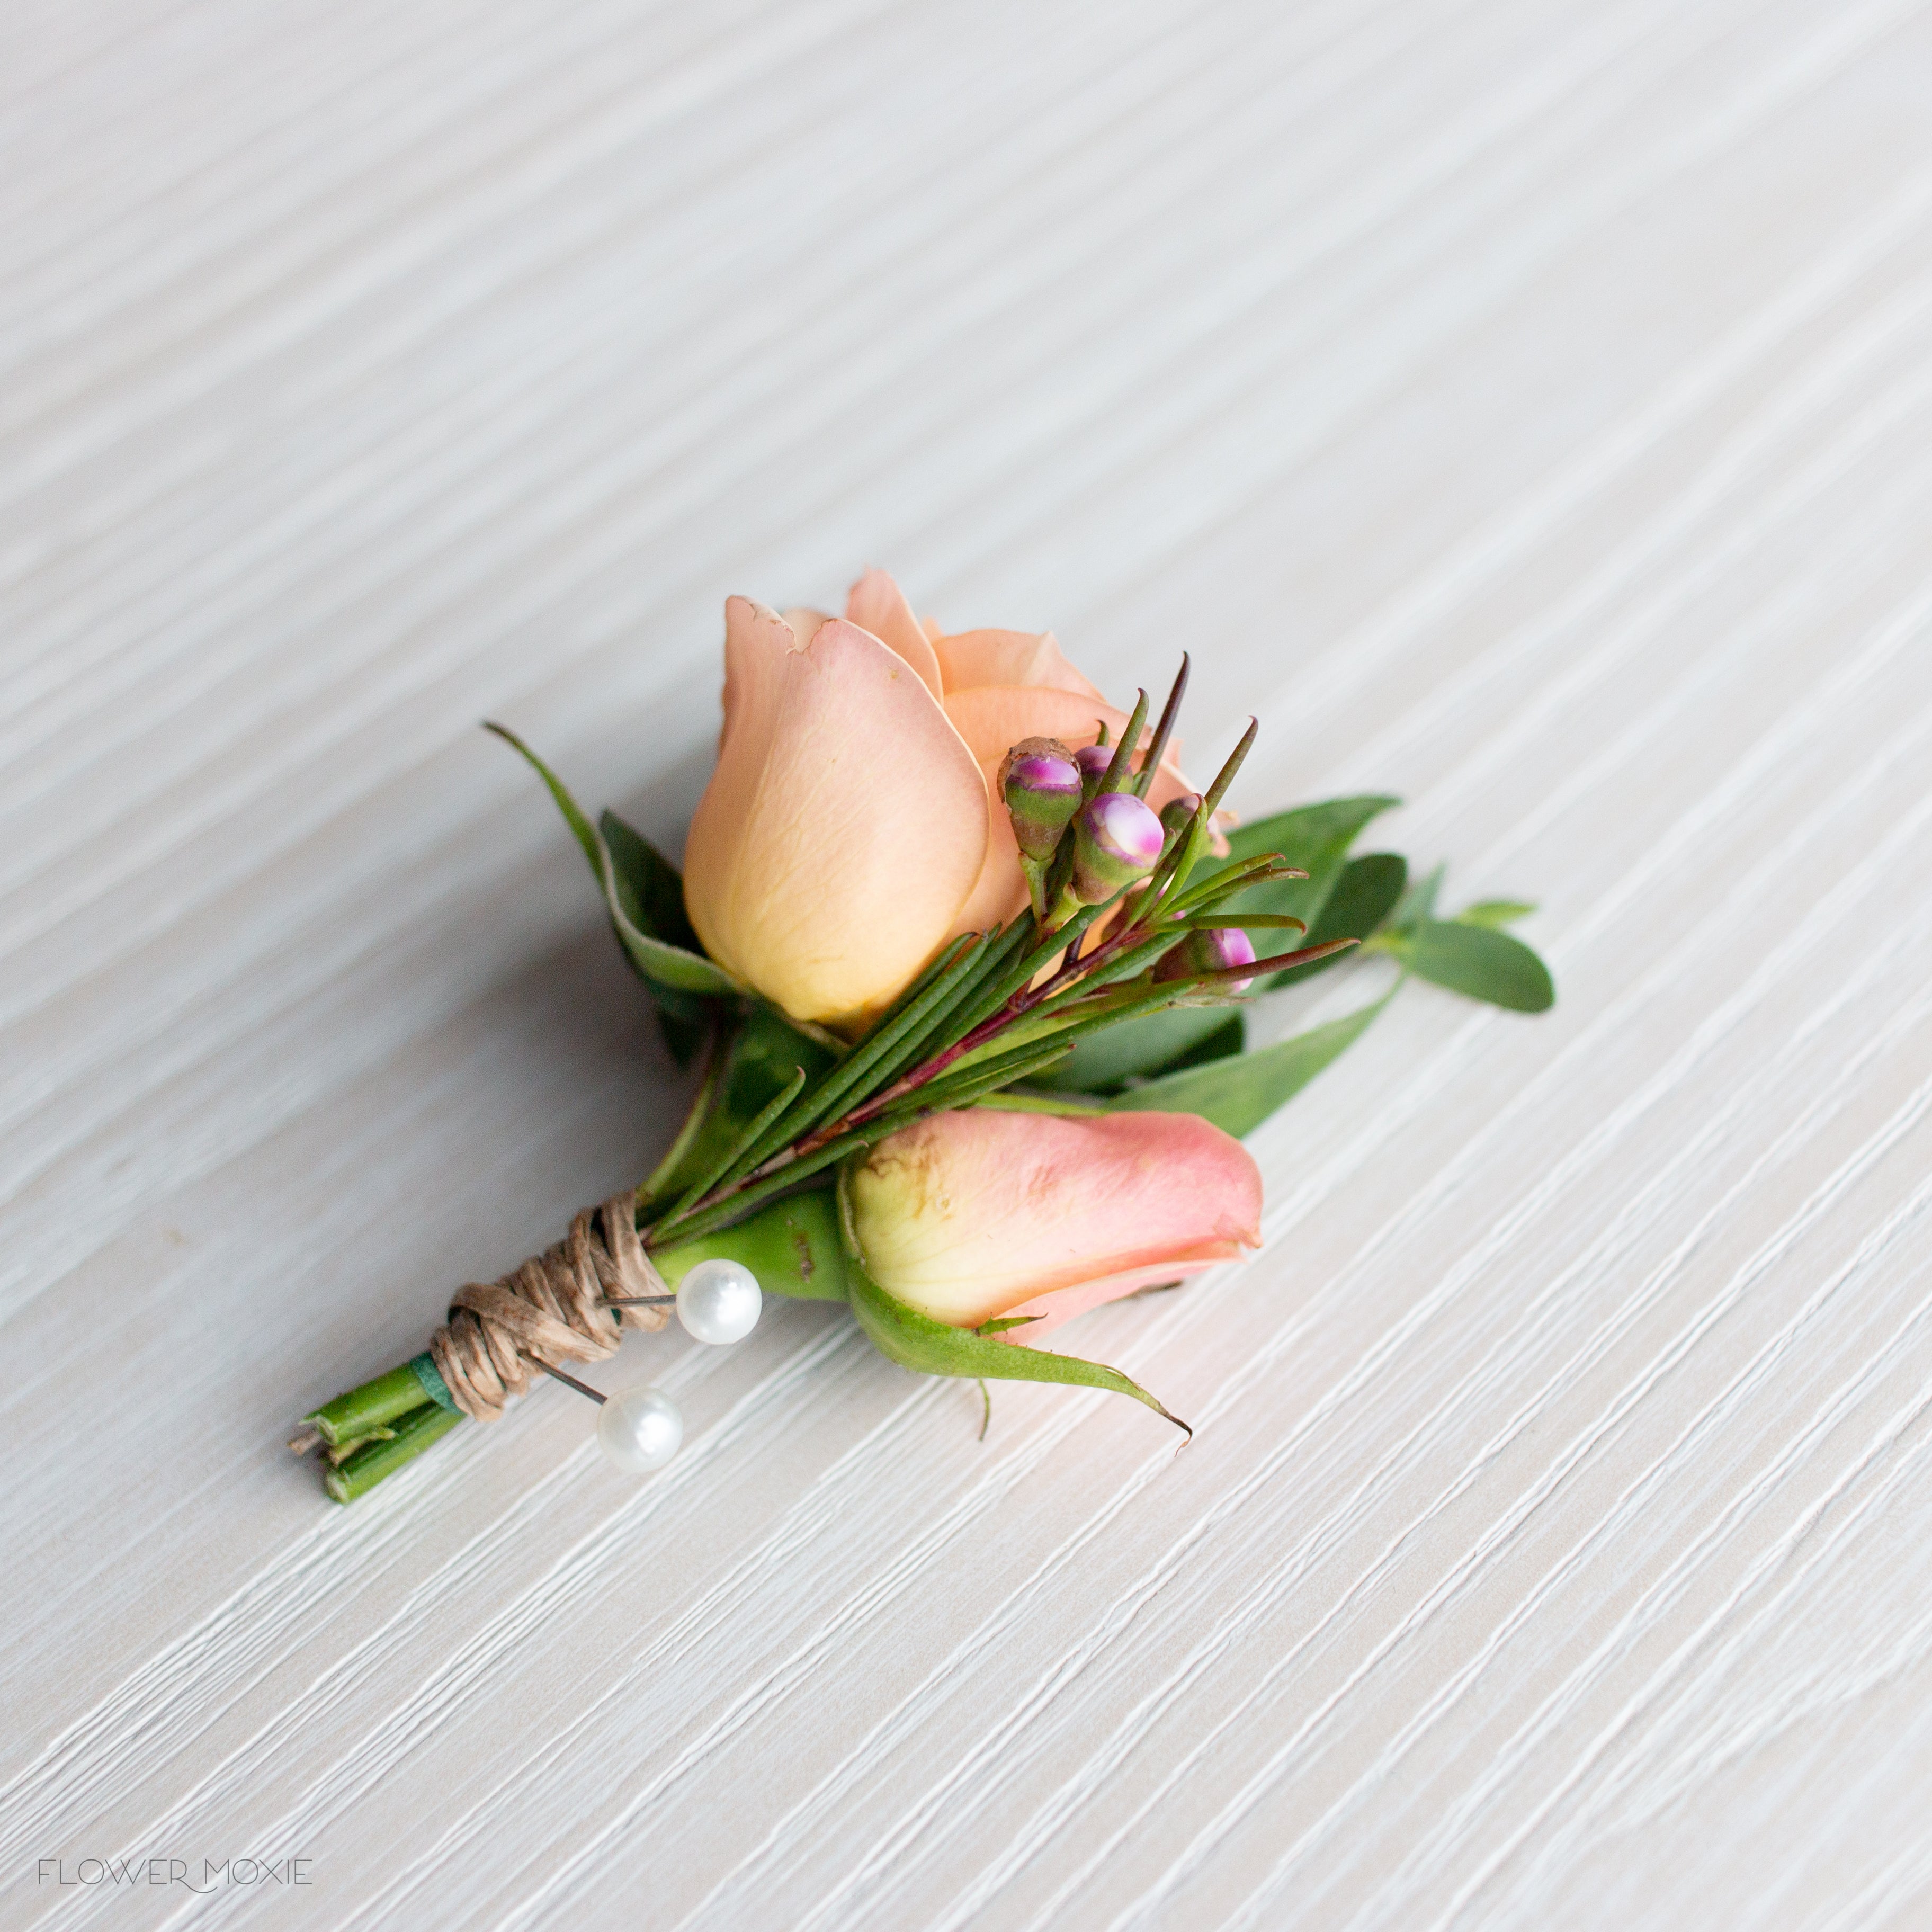 Corsage Pins, Discount, Wholesale Corsage Pins, Cheap Pins, Floral Supplies  - Wholesale Flowers and Supplies